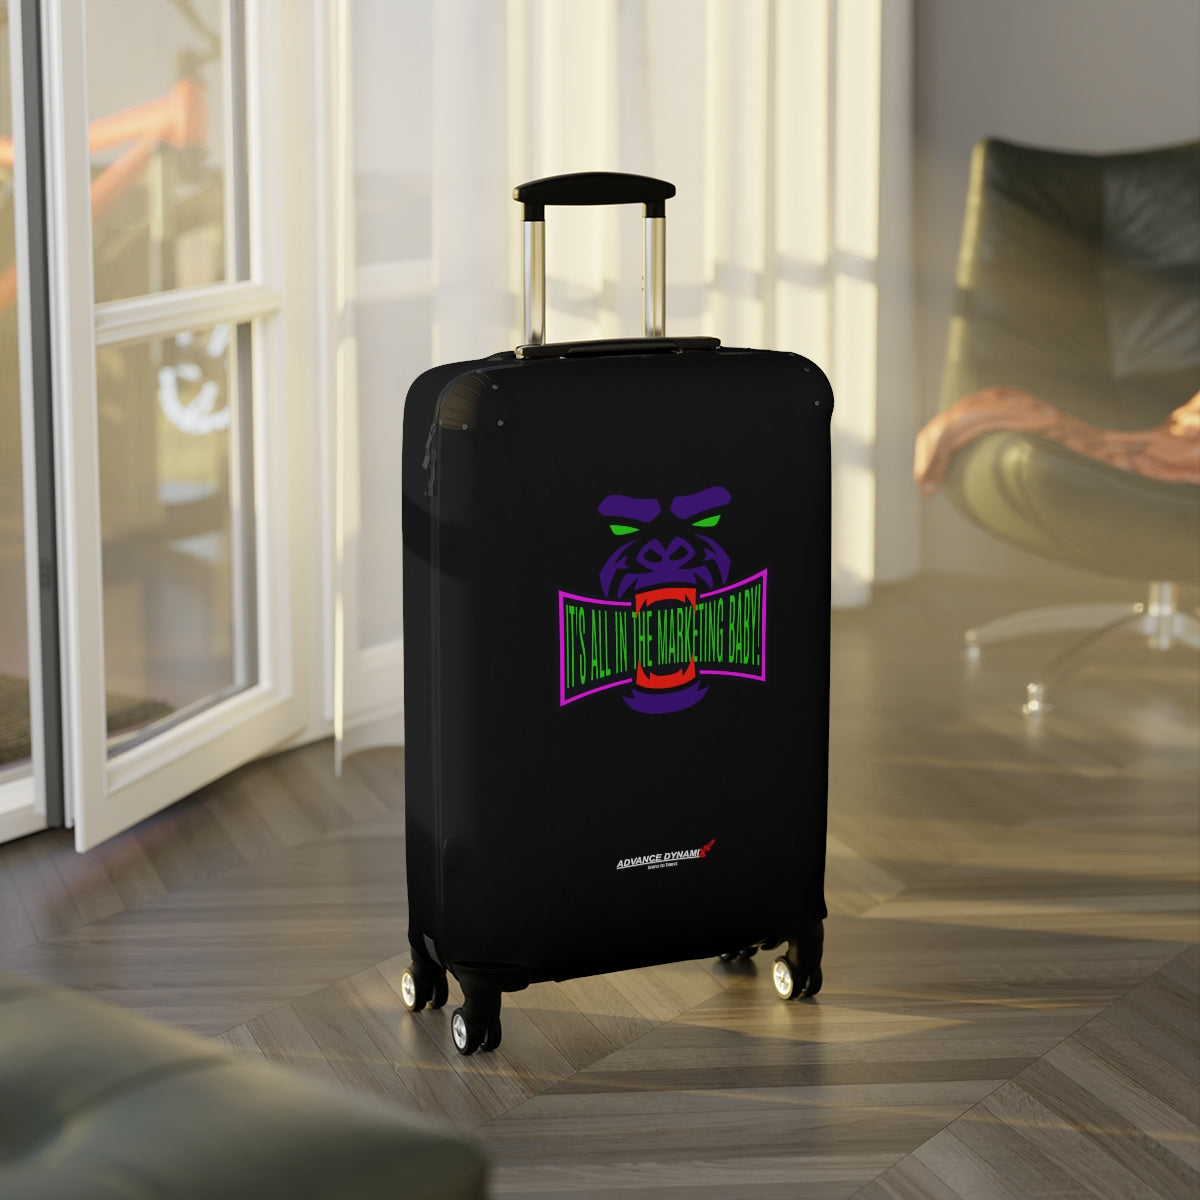 It's All In The Marketing Baby - Luggage Covers Infused with Advance Dynamix Add-A-Tude - Tell the world!